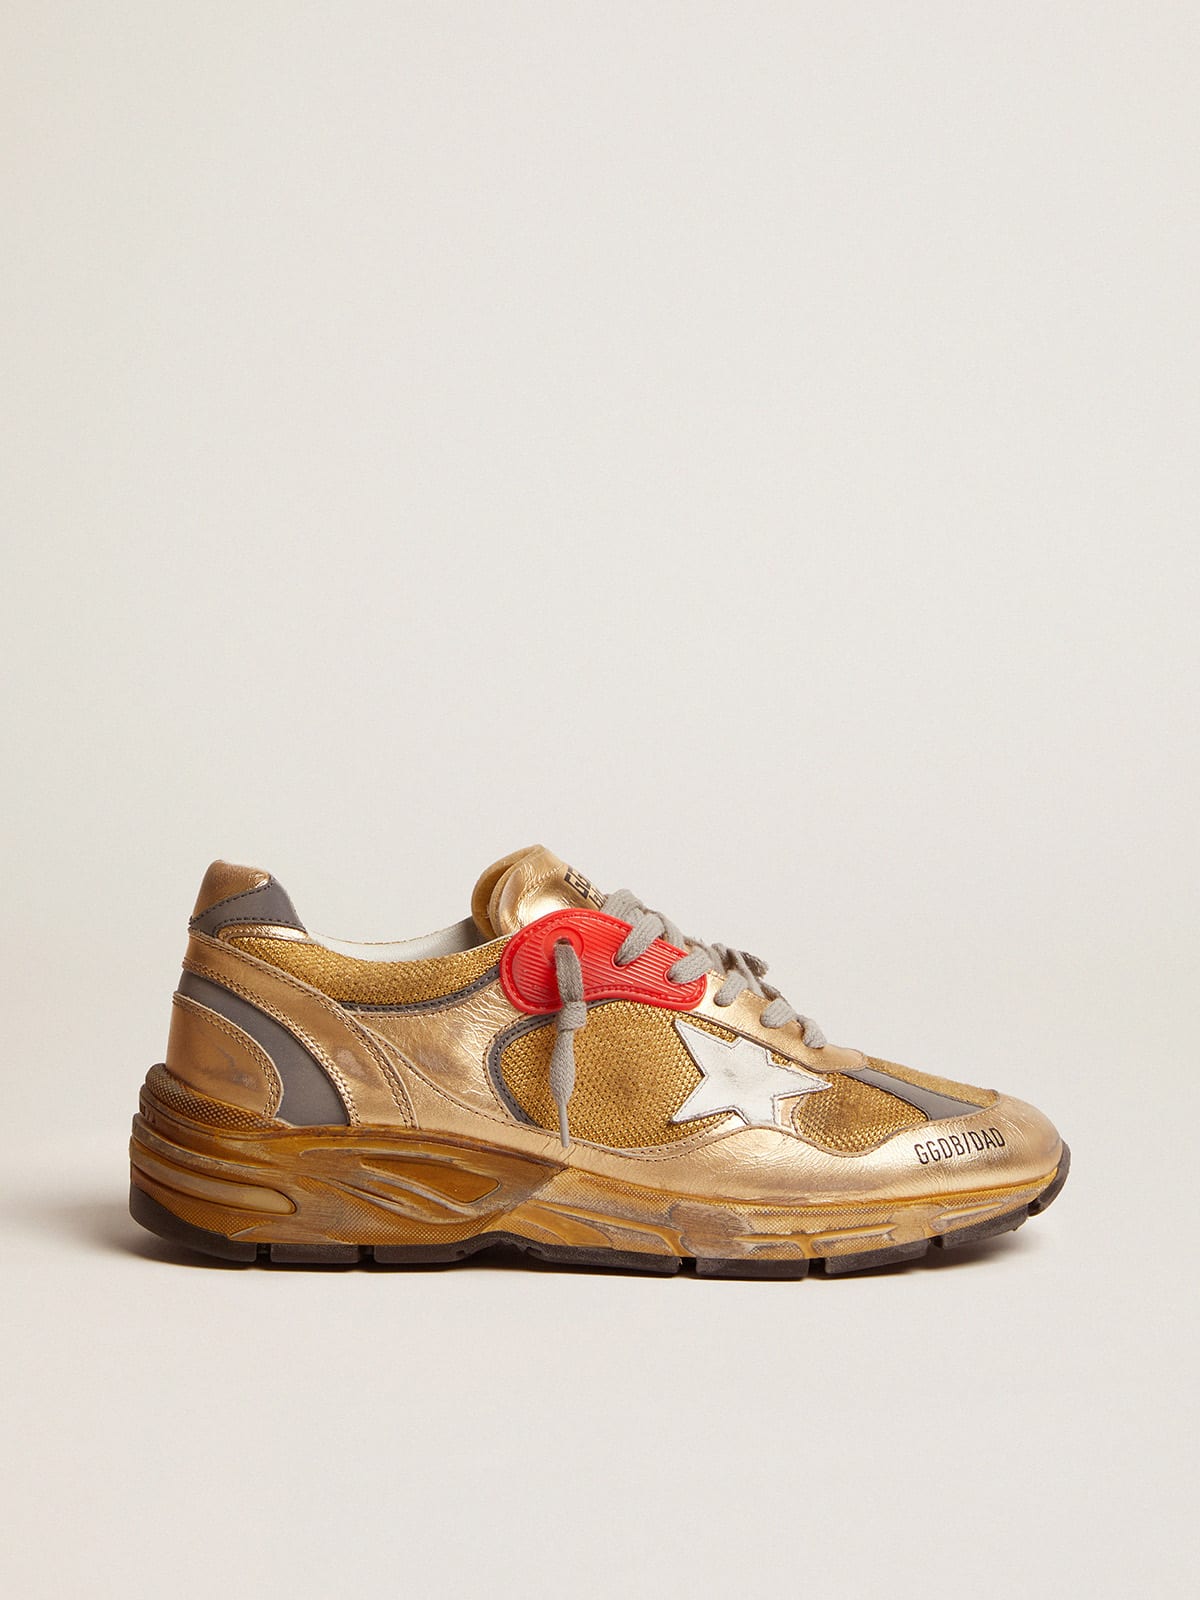 Gold Dad-Star sneakers with distressed finish